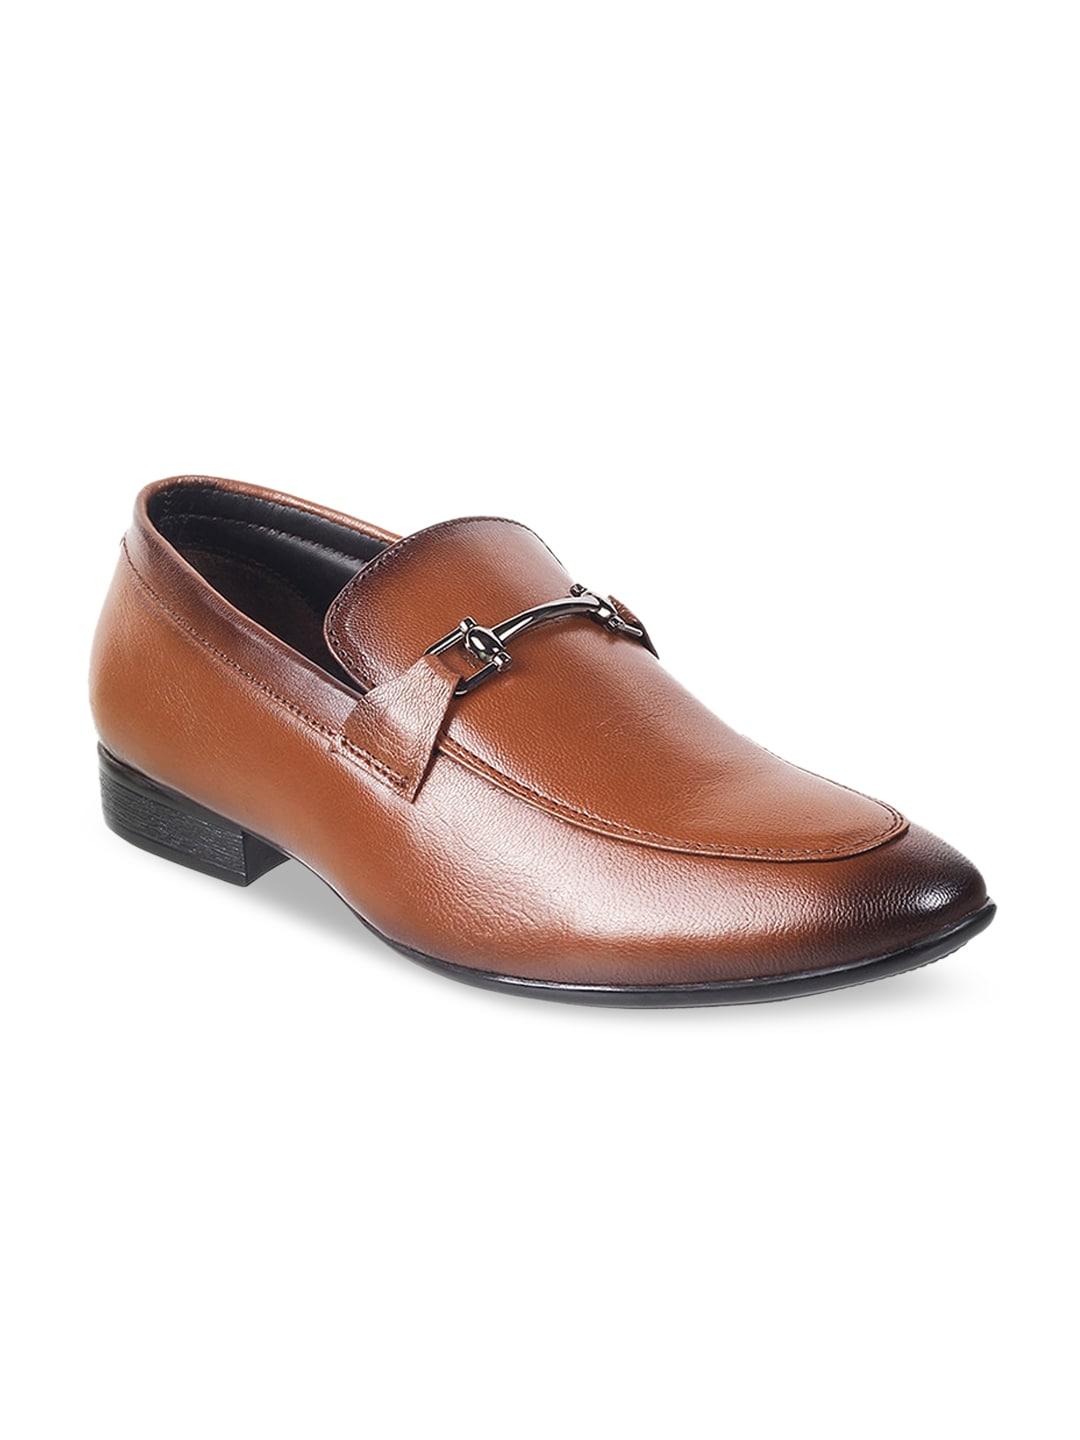 Mochi Men Tan Brown Solid Leather Loafers Formal Shoes